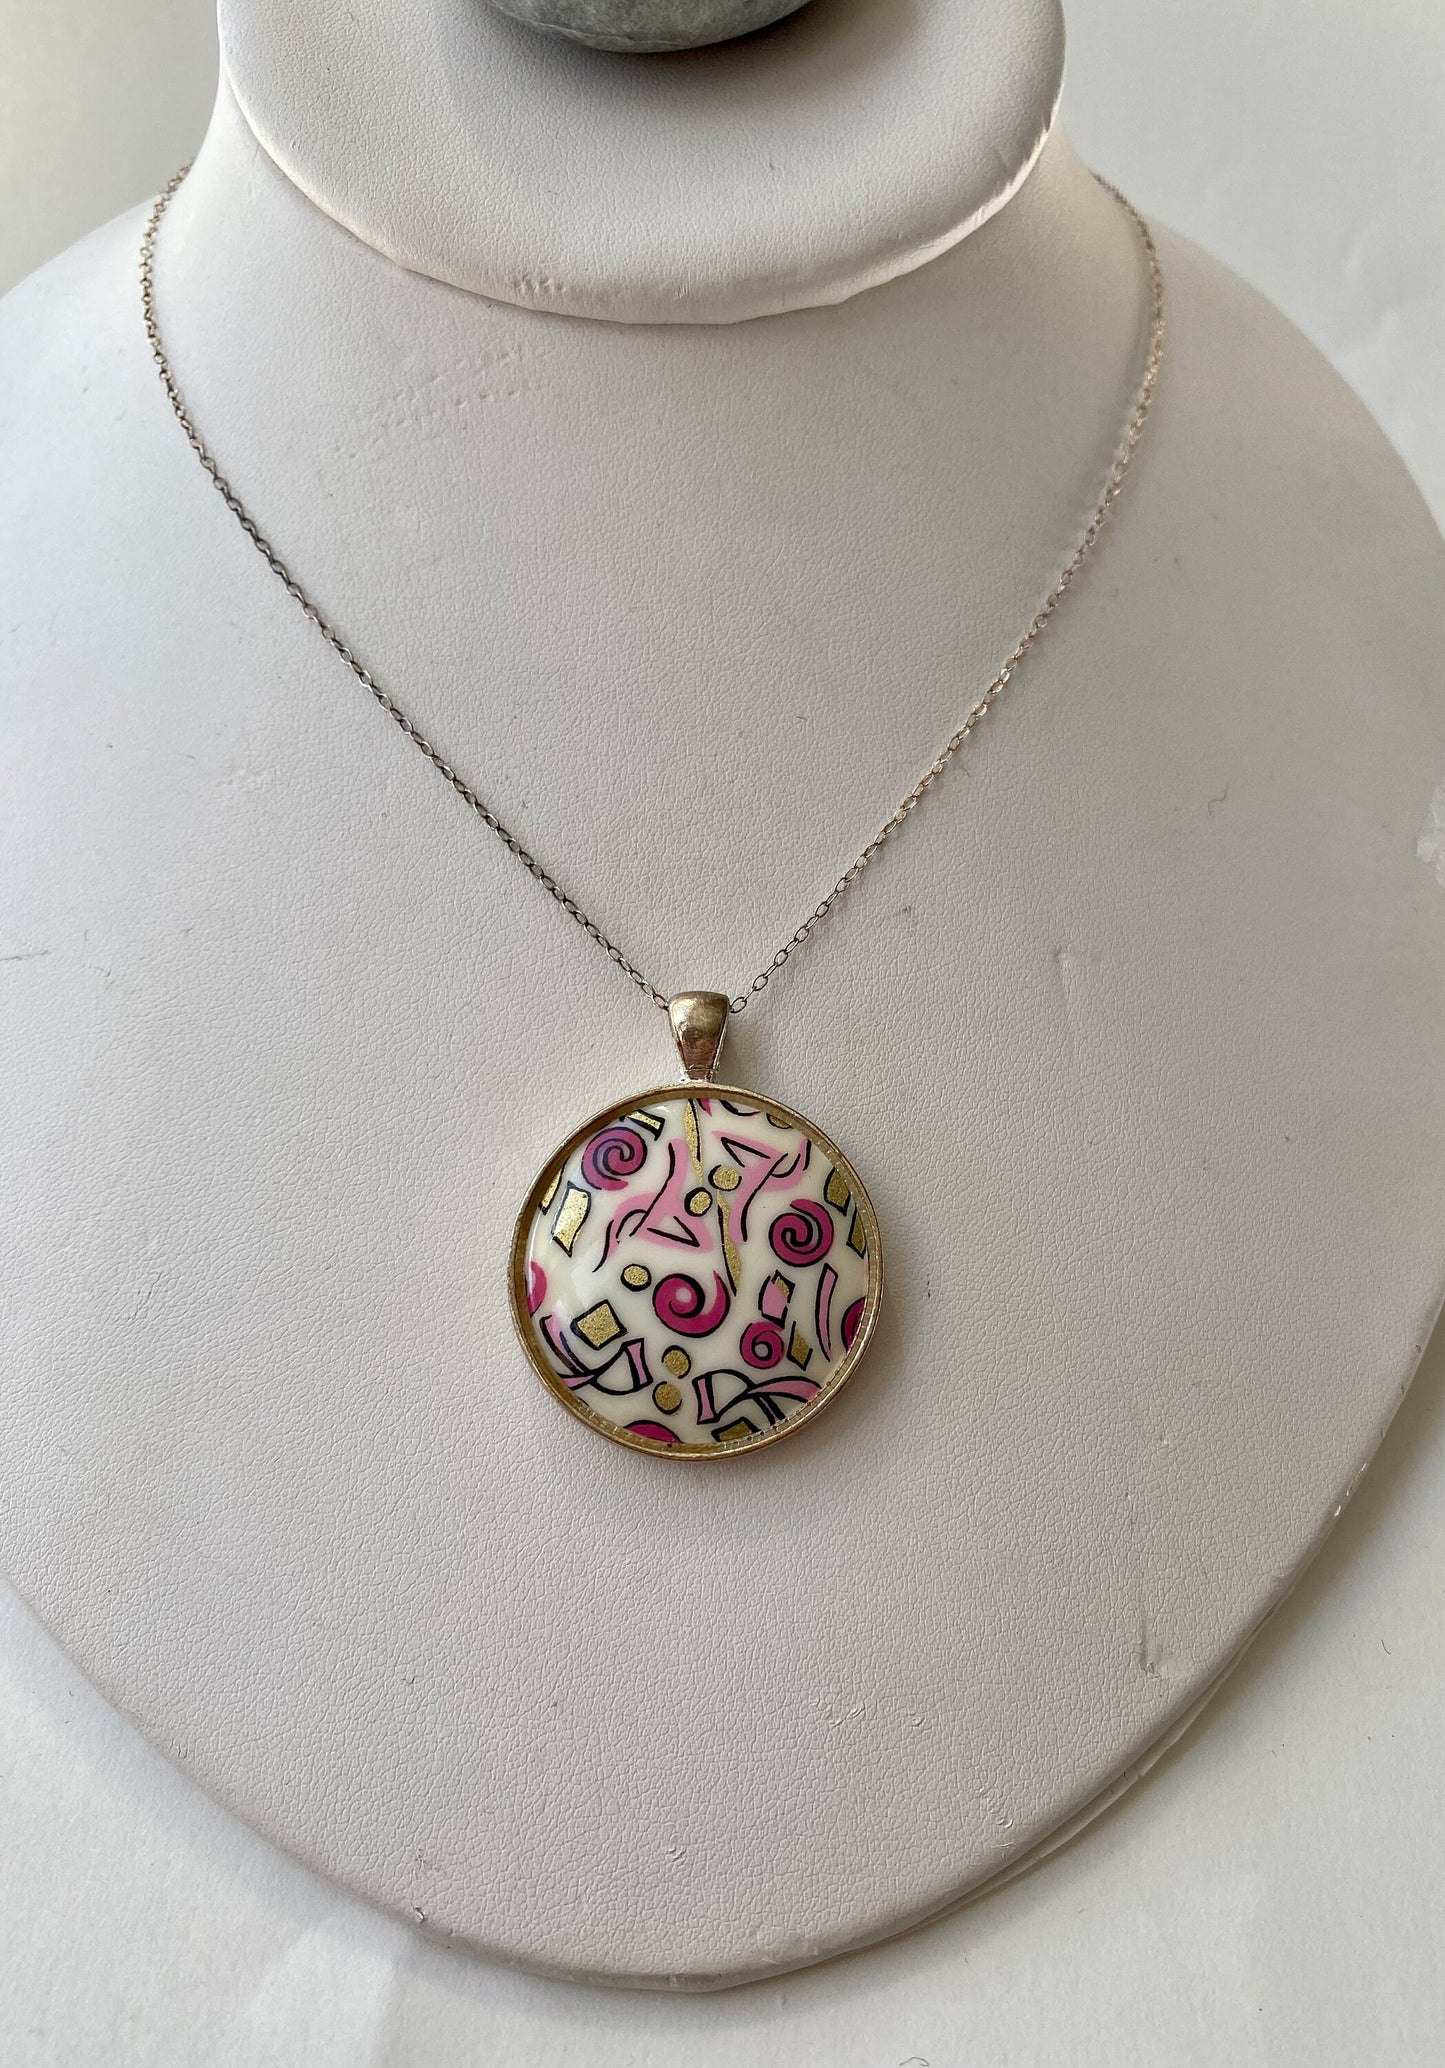 Beautiful retro look pendant.  Set in a silver bezel on a sterling silver chain. Pink and gold fun design.